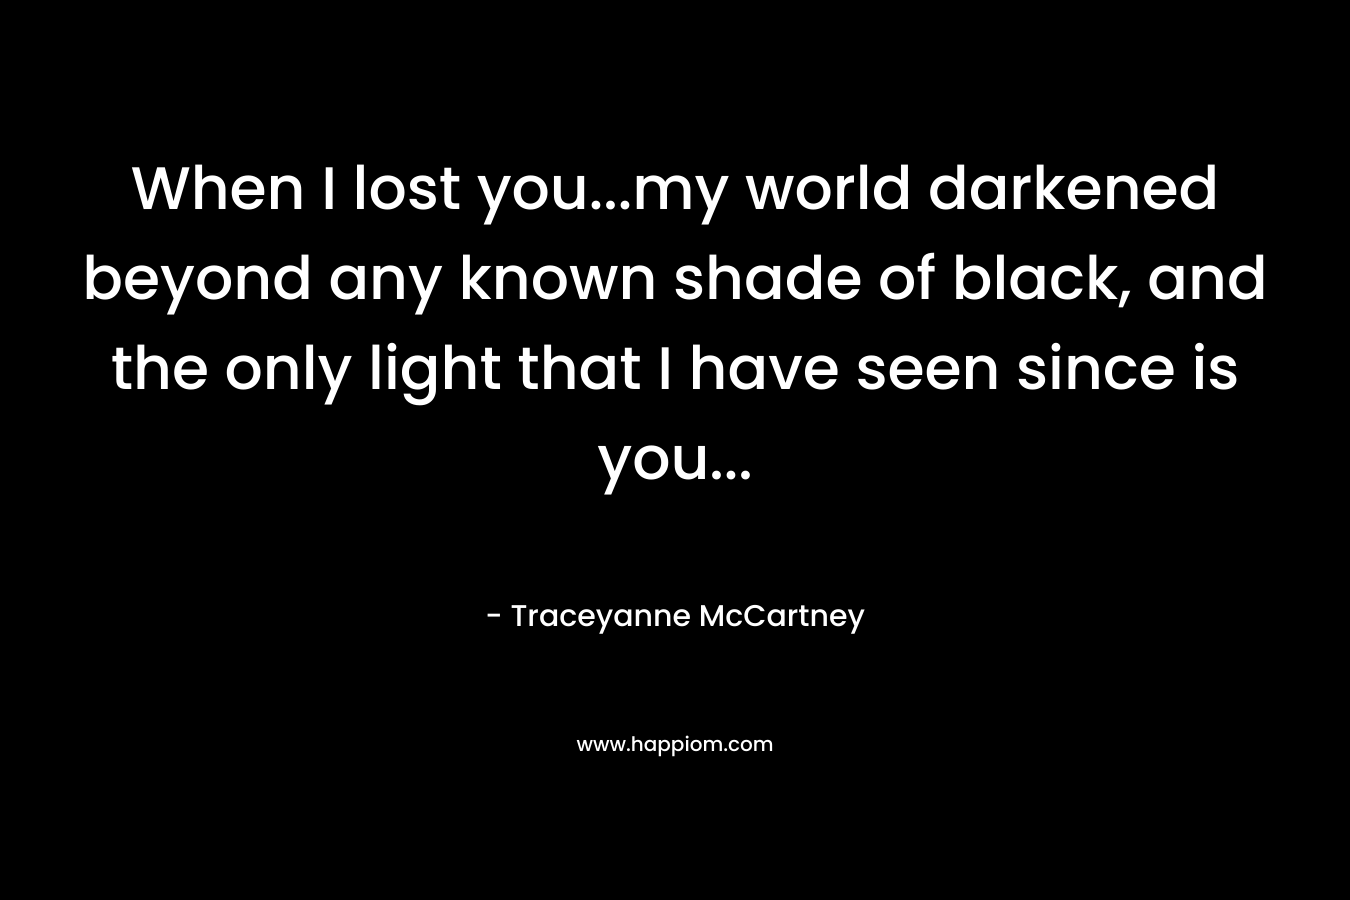 When I lost you...my world darkened beyond any known shade of black, and the only light that I have seen since is you...